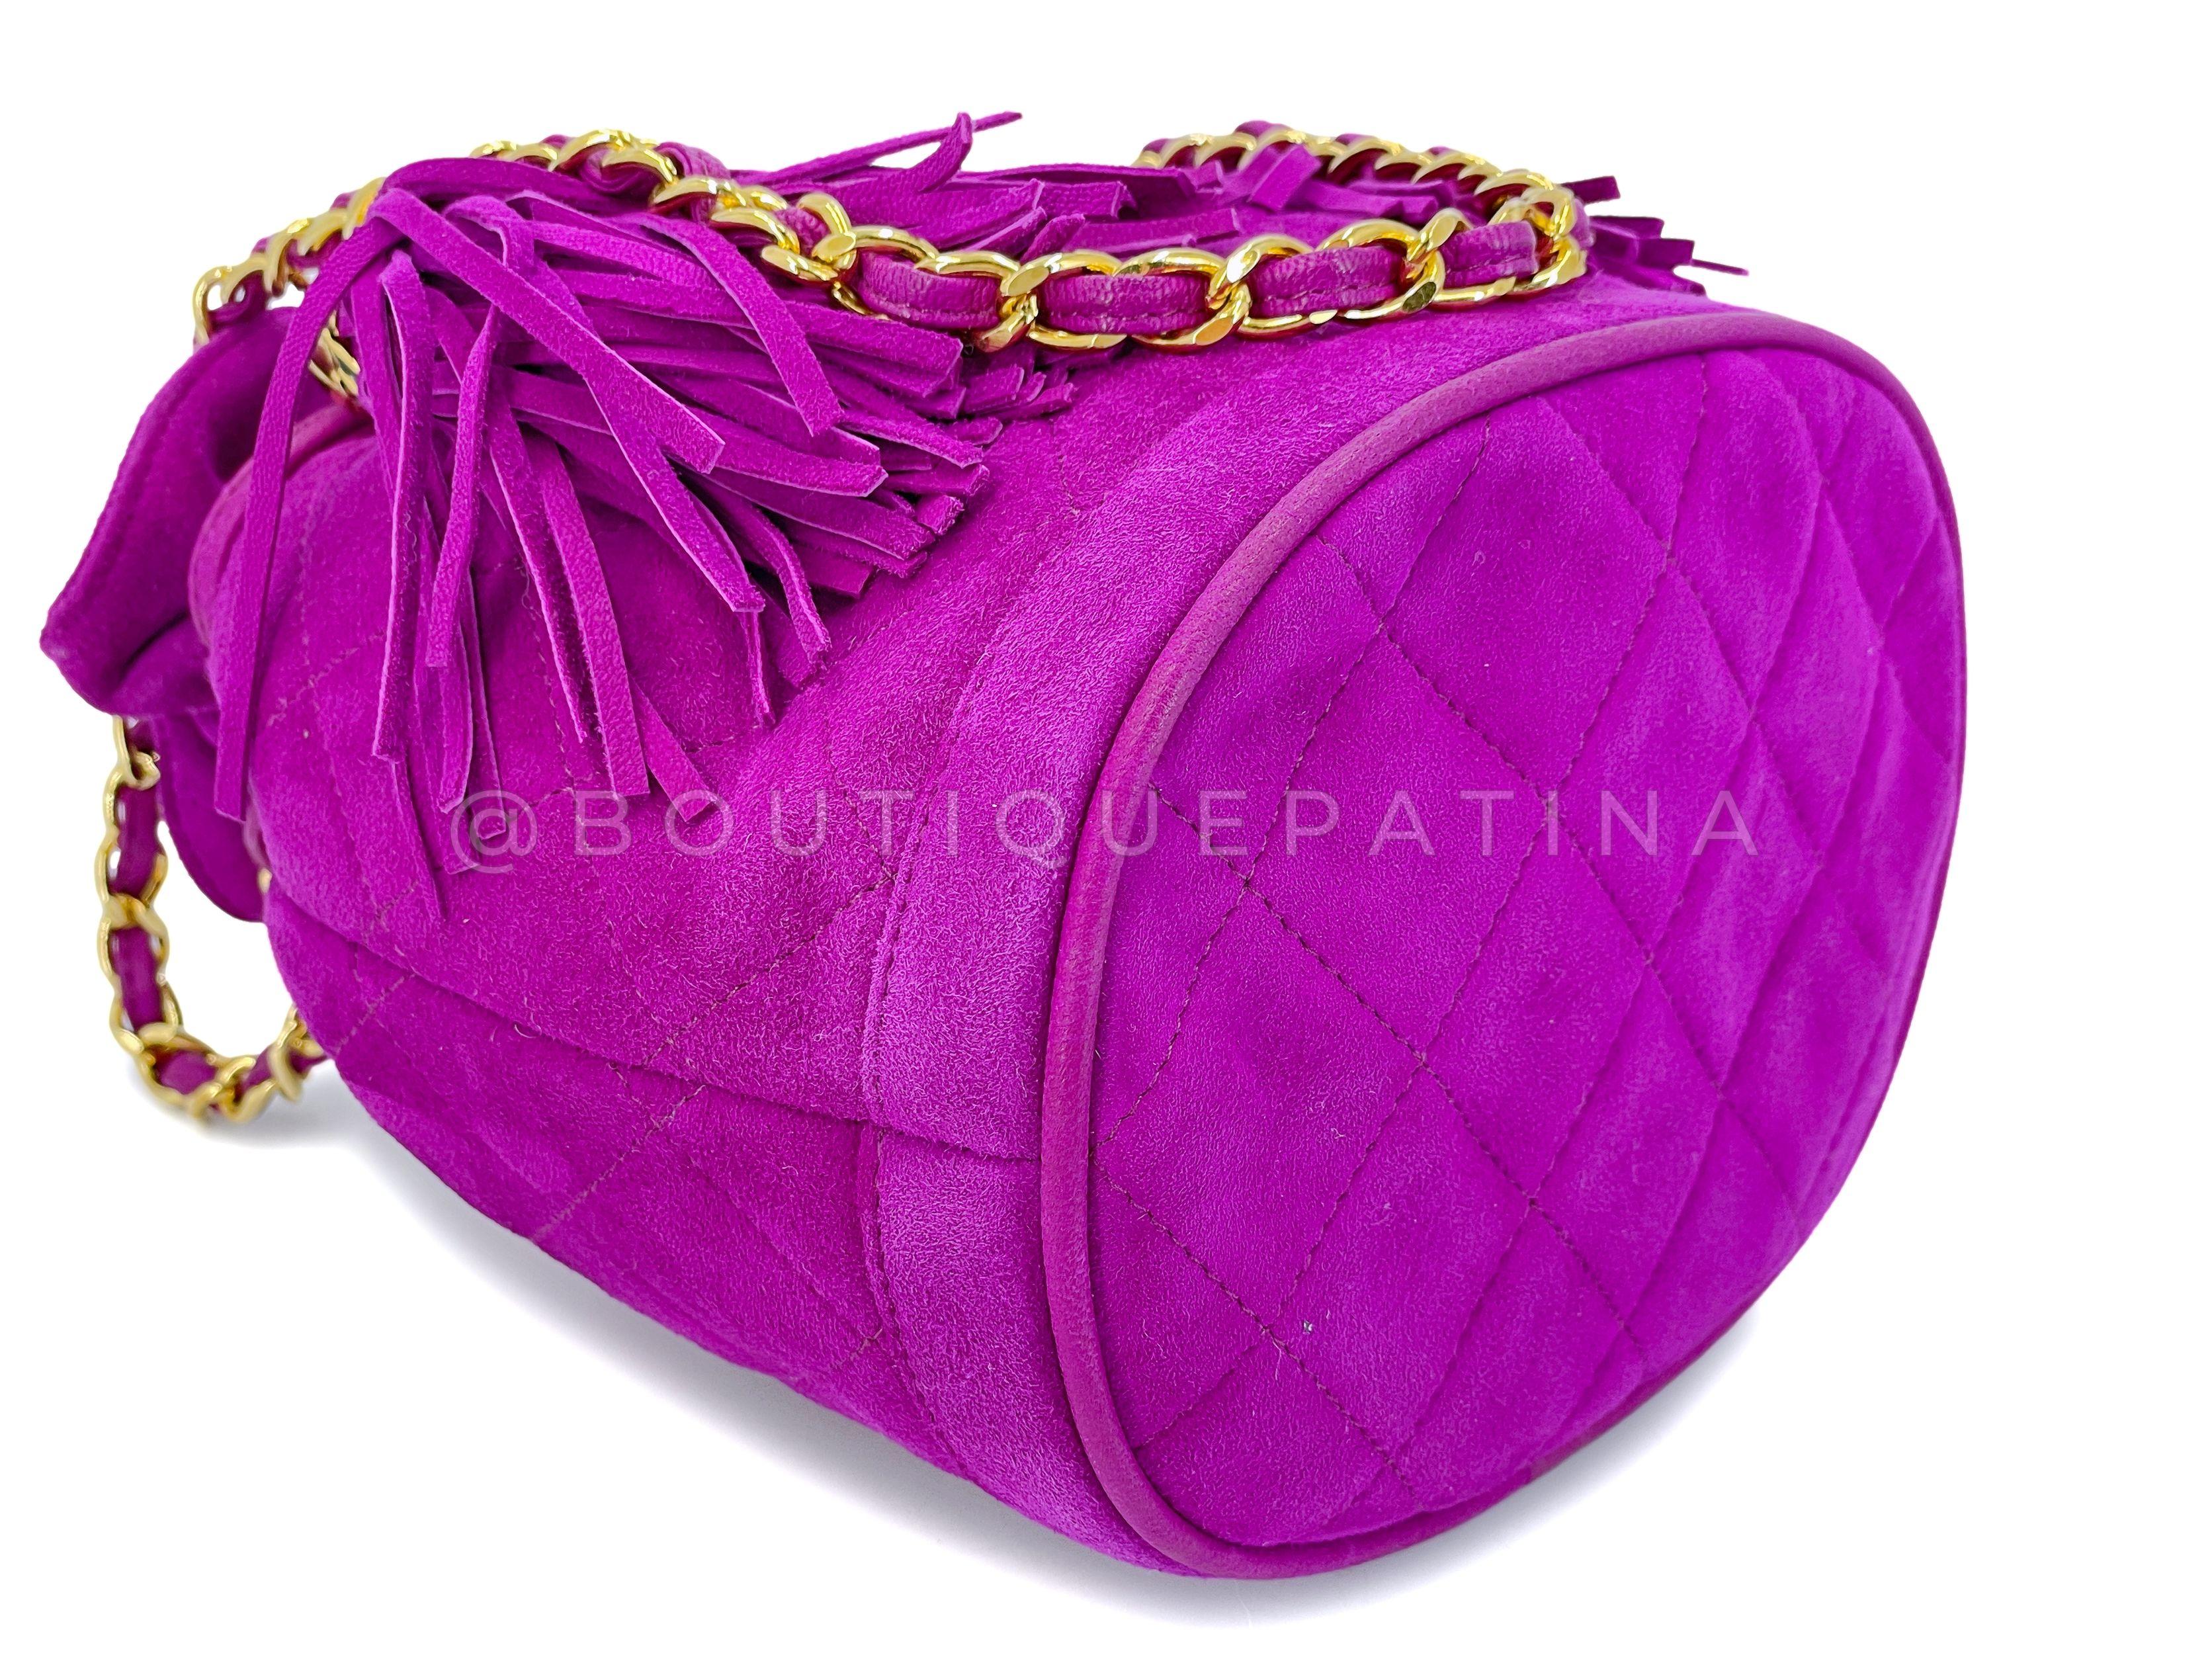 Rare Chanel 1990 Pink-Purple Suede Mini Drawstring Bucket Bag 24k GHW 67450 For Sale 2